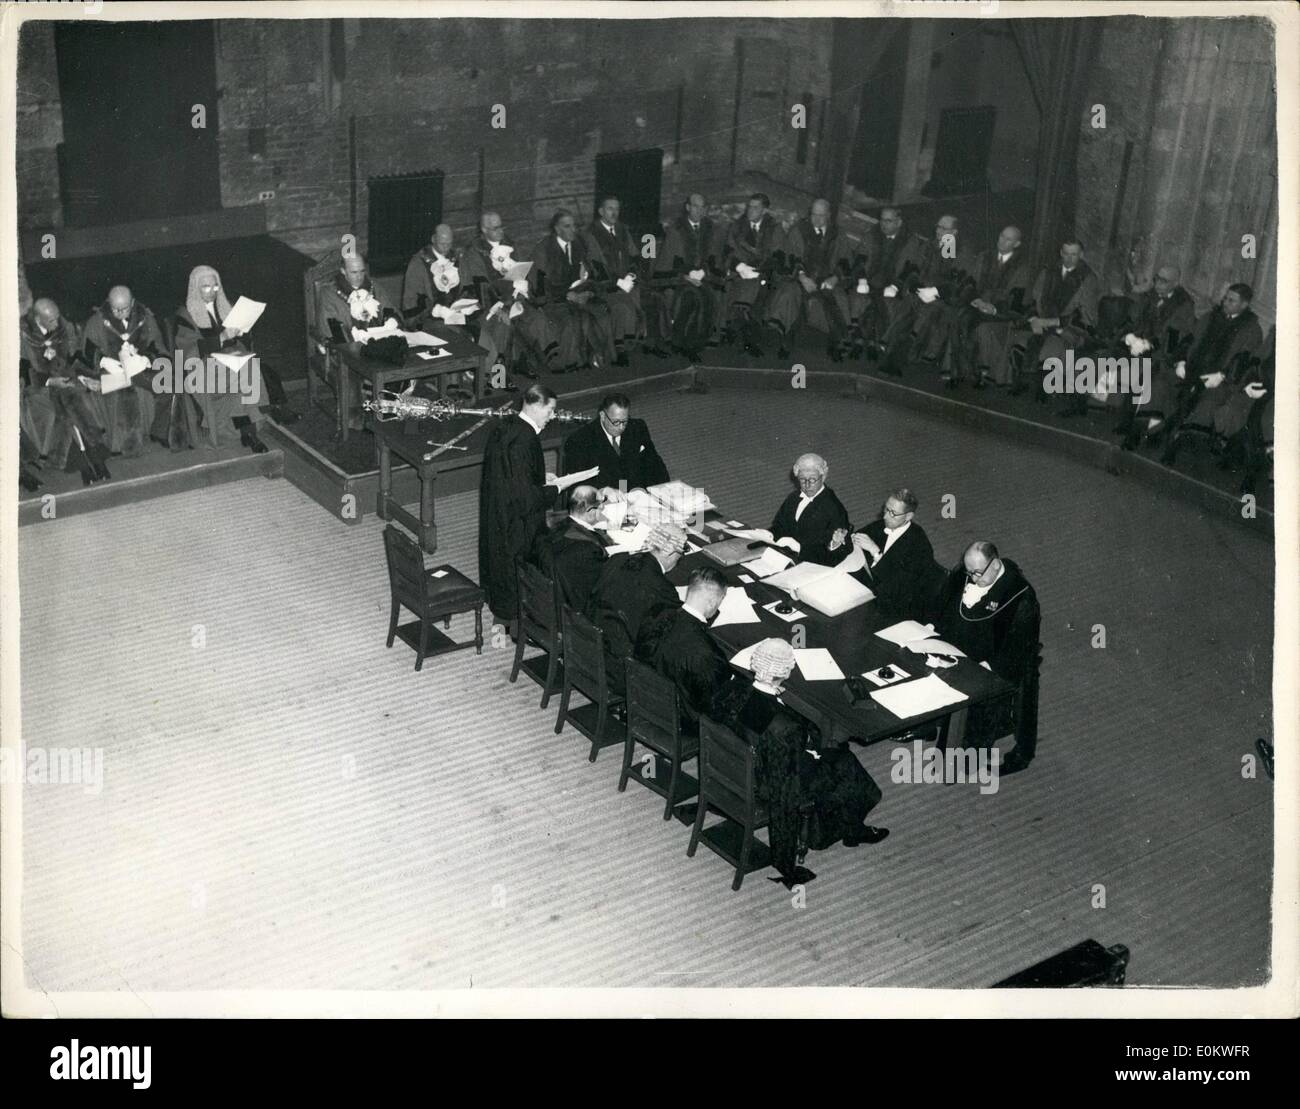 Nov. 11, 1951 - The Lord Mayor acts as judge at the court of Husting at the Guildhall: One of the first duties of the Lord Mayor - Sir Leslie Boyce was today to act as Judge at the Court of Hustings held at the Guildhall . This is the first time that the Court has been held at the Guildhall since 1942. More than 800 years ago the jurisdiction of the court extended over all Civil actions but now it is used only for the registration of deeds. The court of Hustings superseded the ancient assembly of citizens known as ''folkmoot'' Stock Photo